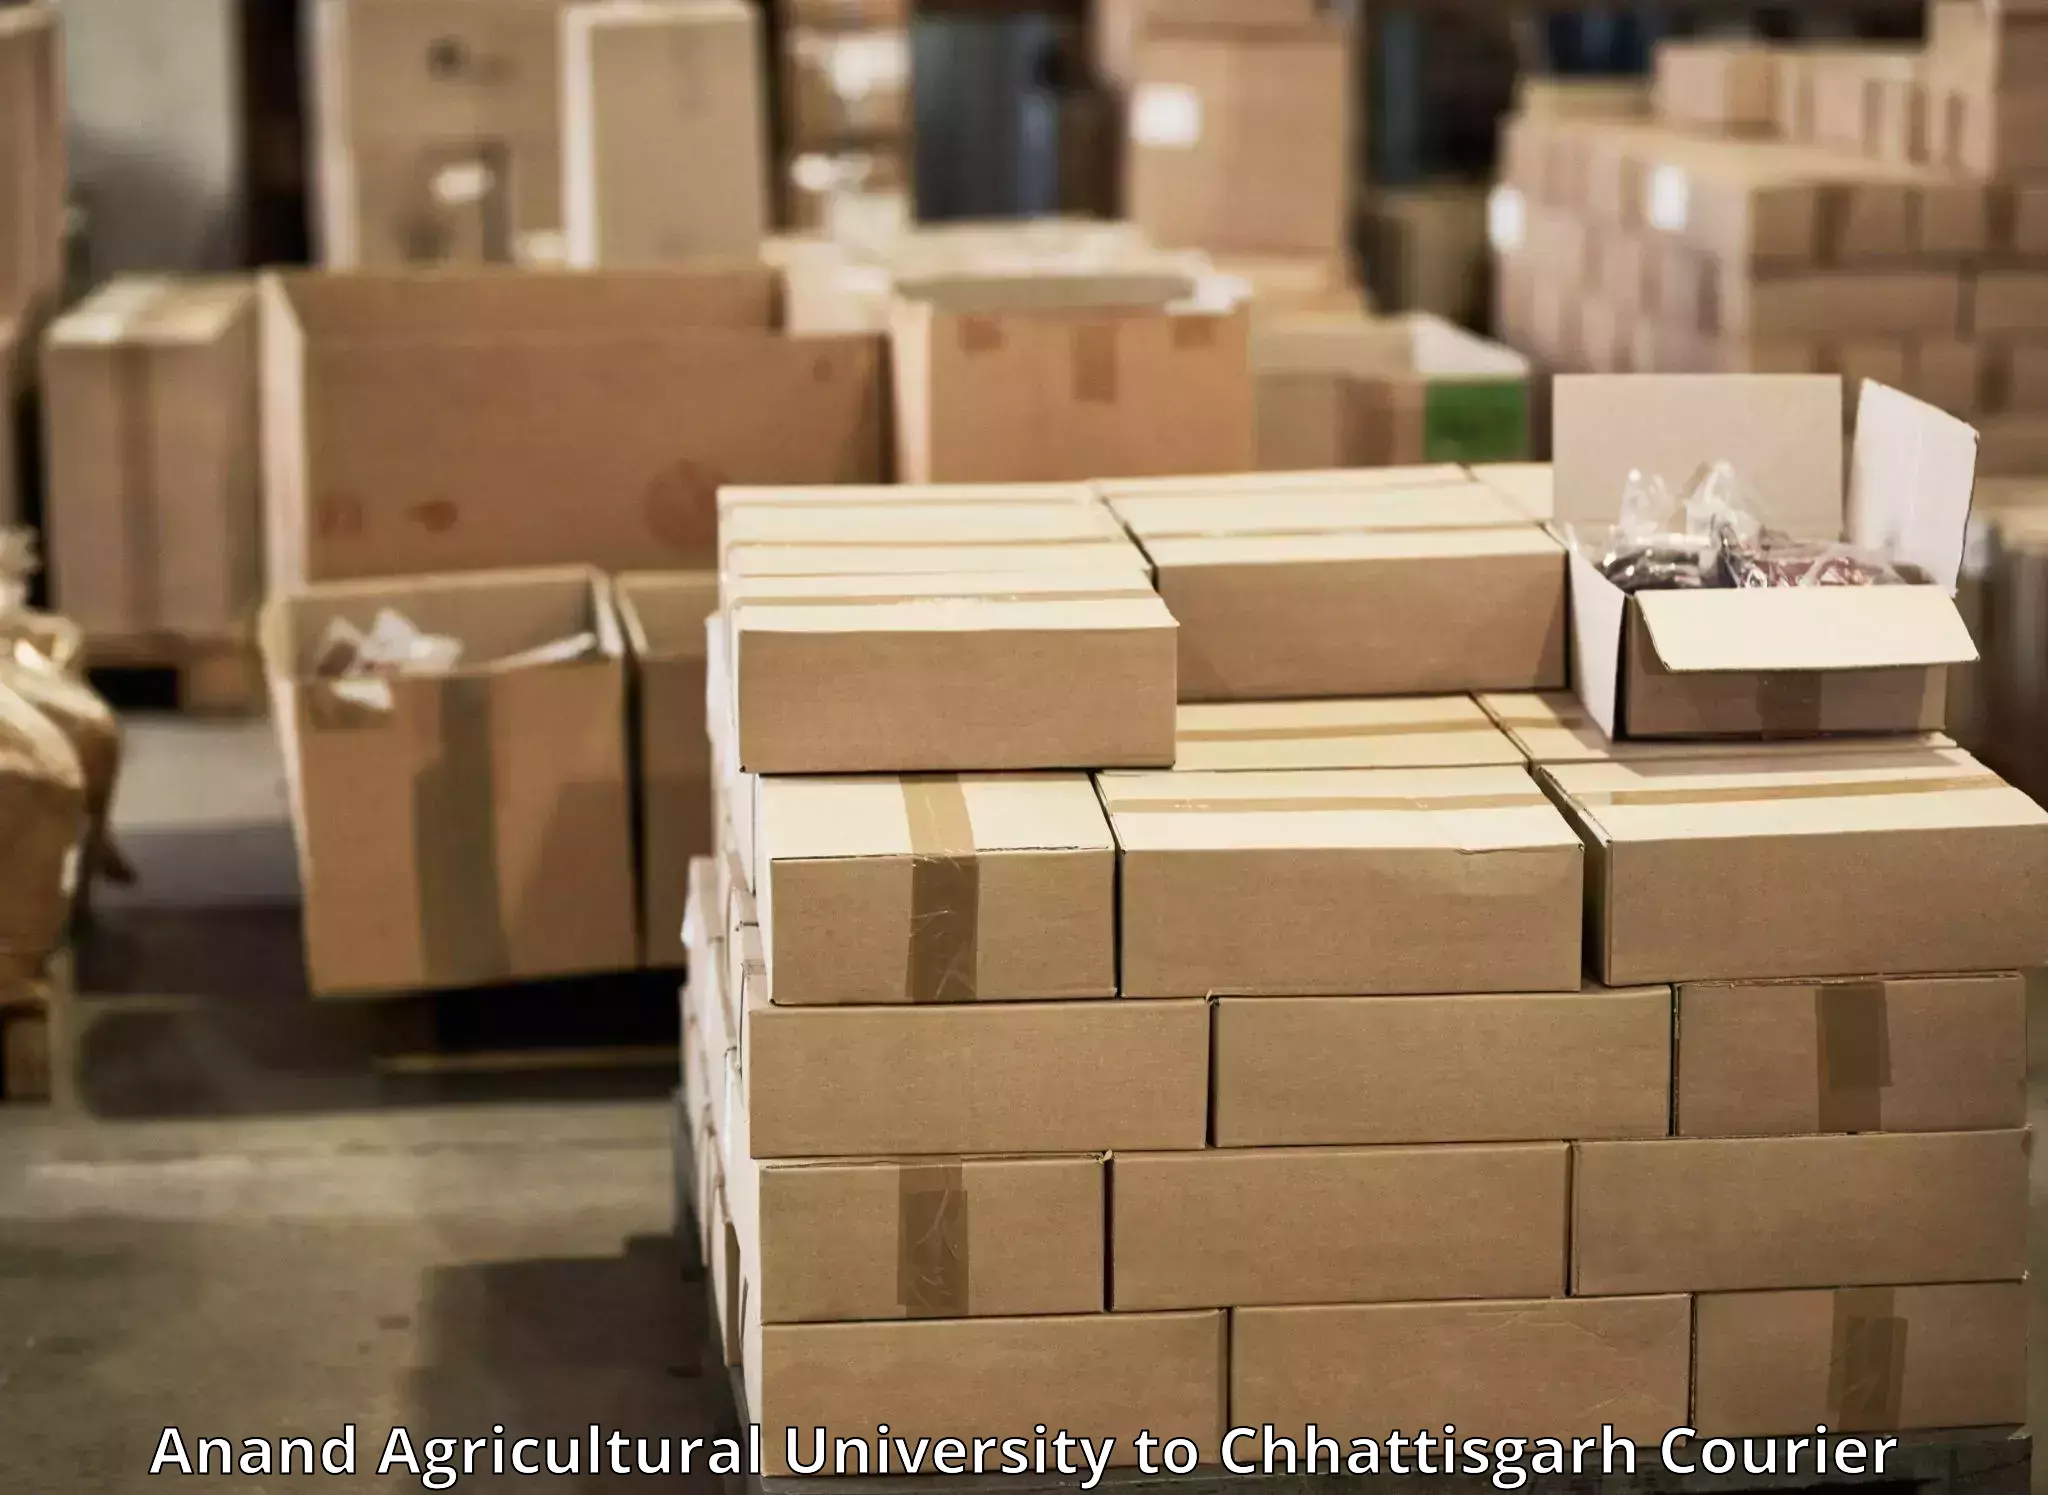 Shipping and handling Anand Agricultural University to Patna Chhattisgarh